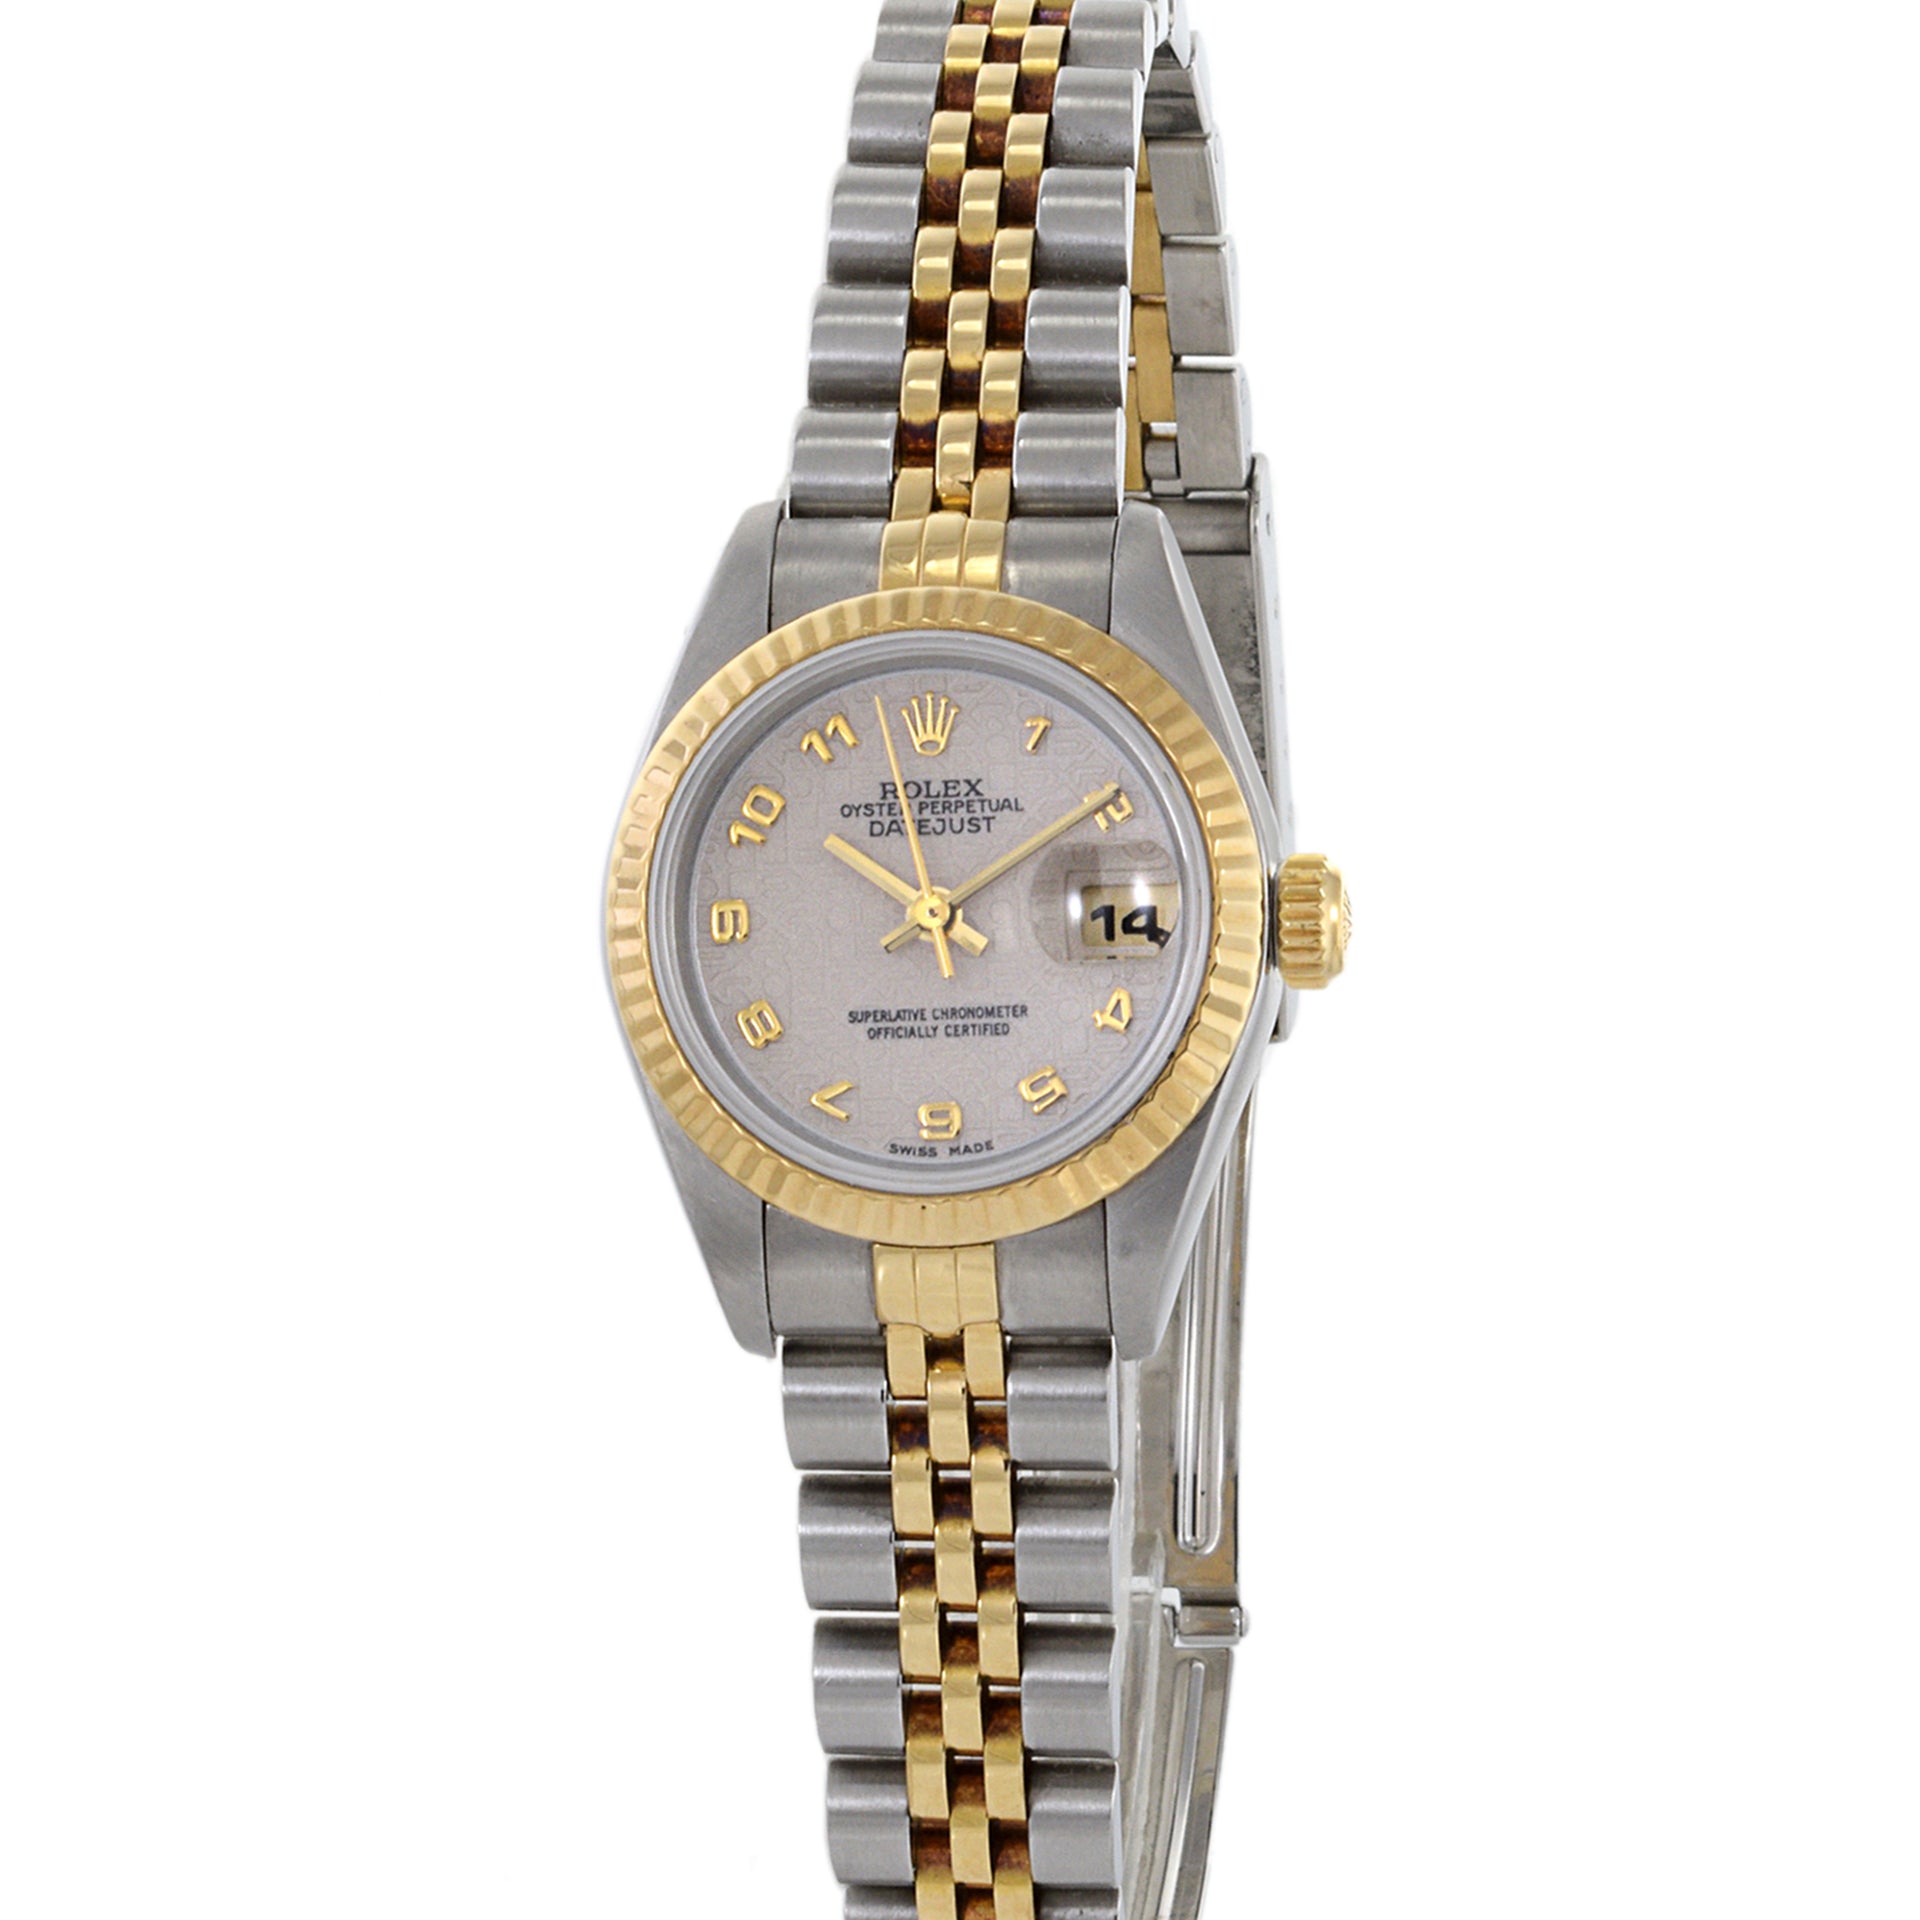 Rolex Lady Datejust Reference 69173 26mm Anniversary Dial Stainless Steel and 18K Yellow Gold